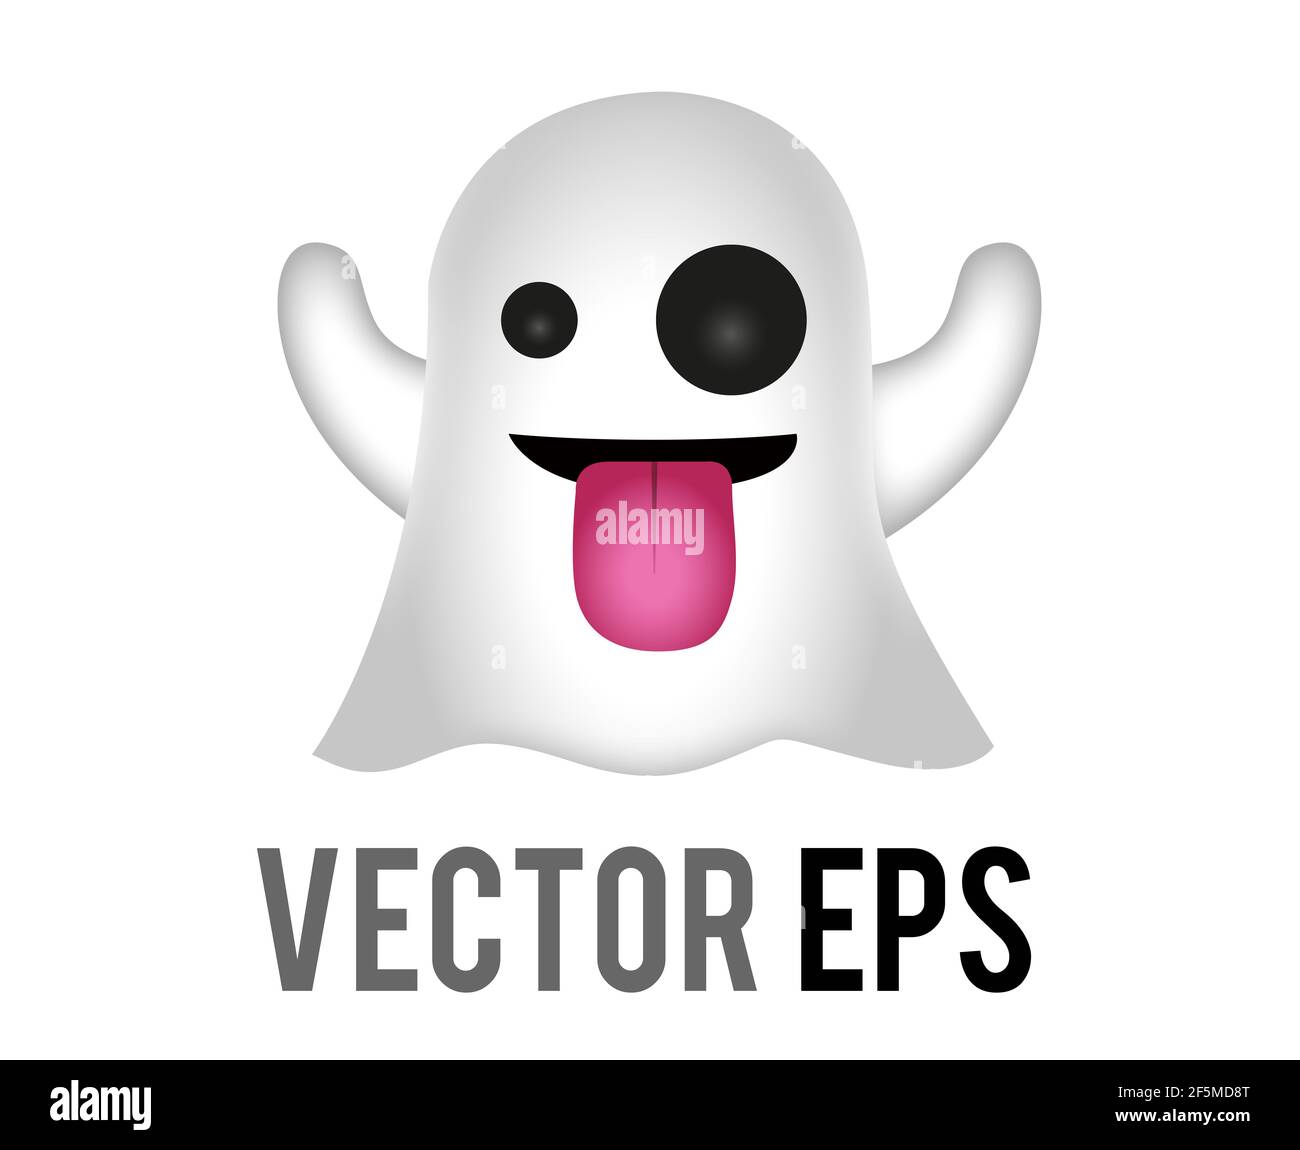 The vector white funny cartoon ghost making silly face icon, tongue is stuck out, arms are outstretched.  Trying to scare someone in friendly way Stock Photo